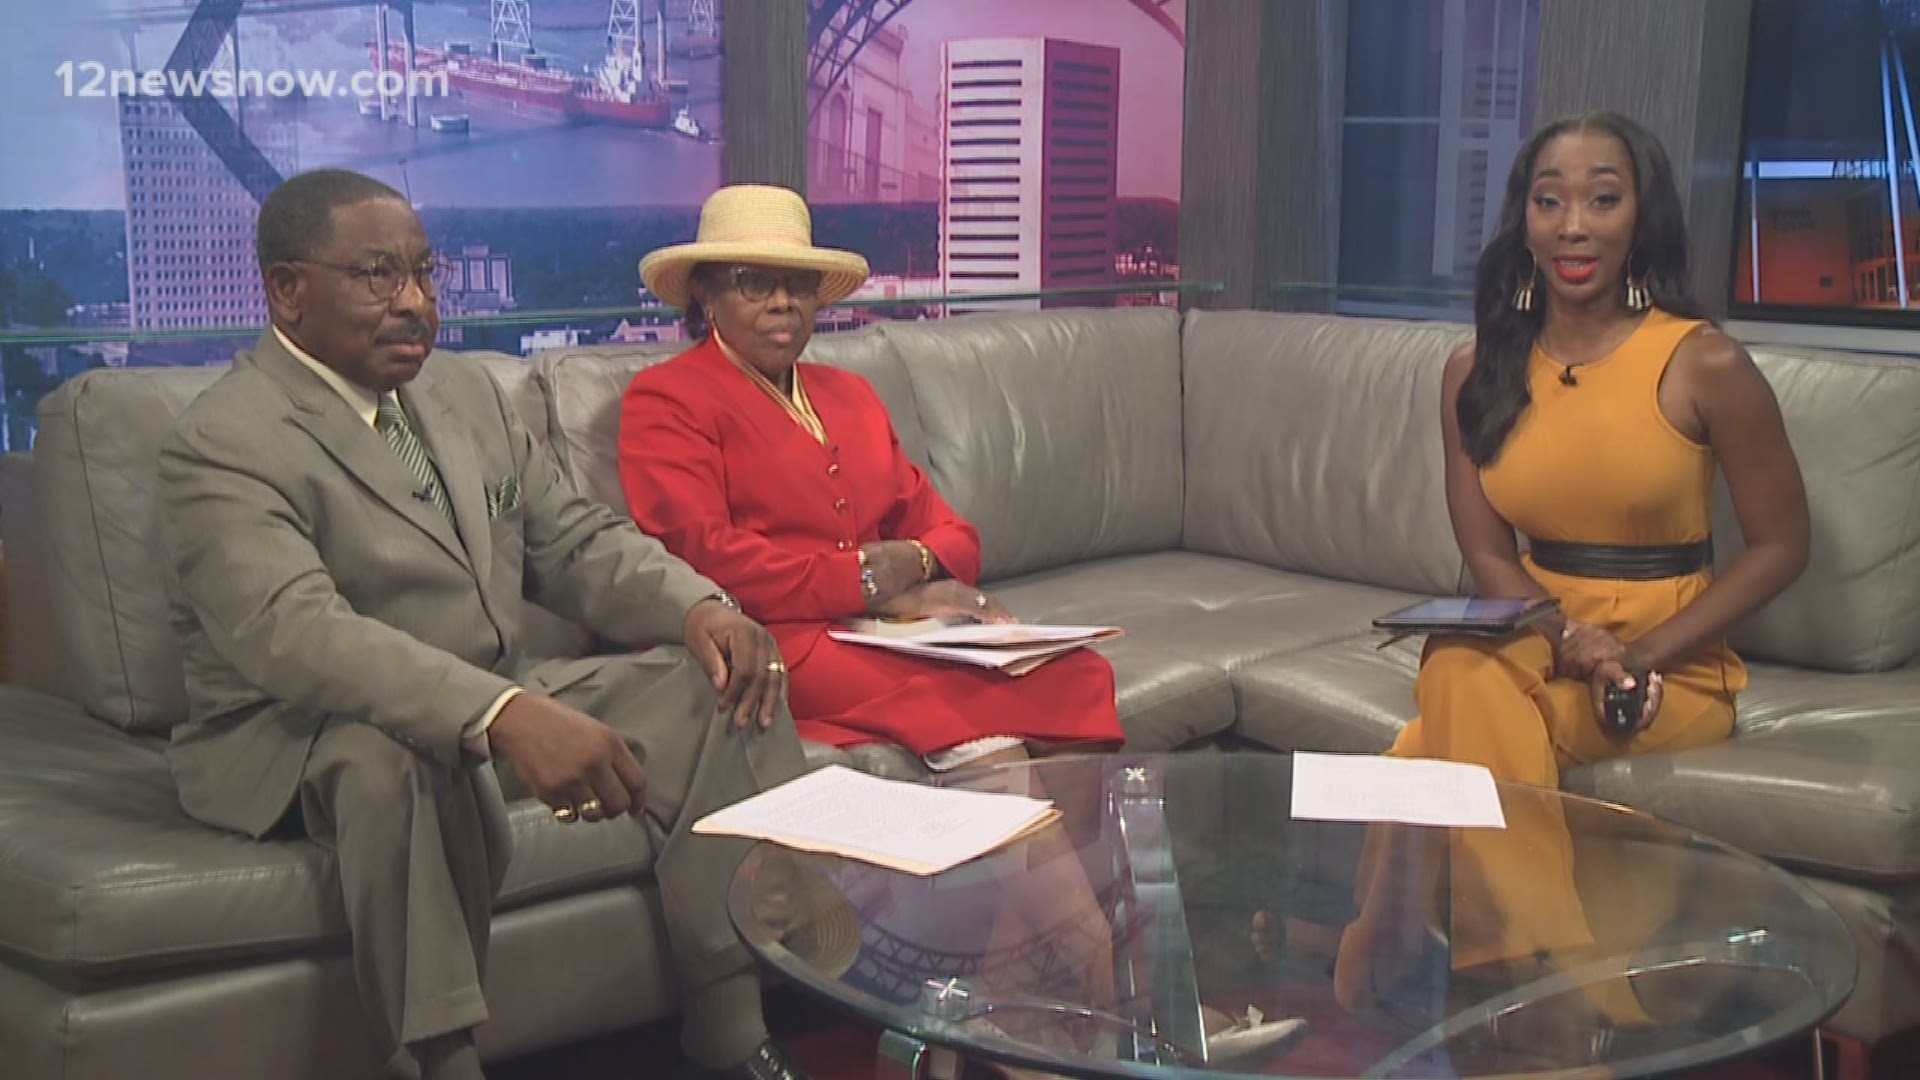 If you're looking for some inspiration this week the Port Arthur Citizens' Drug Task Force is hosting a prayer and praise on Sunday, June 23, 2019 at 6 p.m. Eddie Durham and Allen Watson came by to tell us all about it!